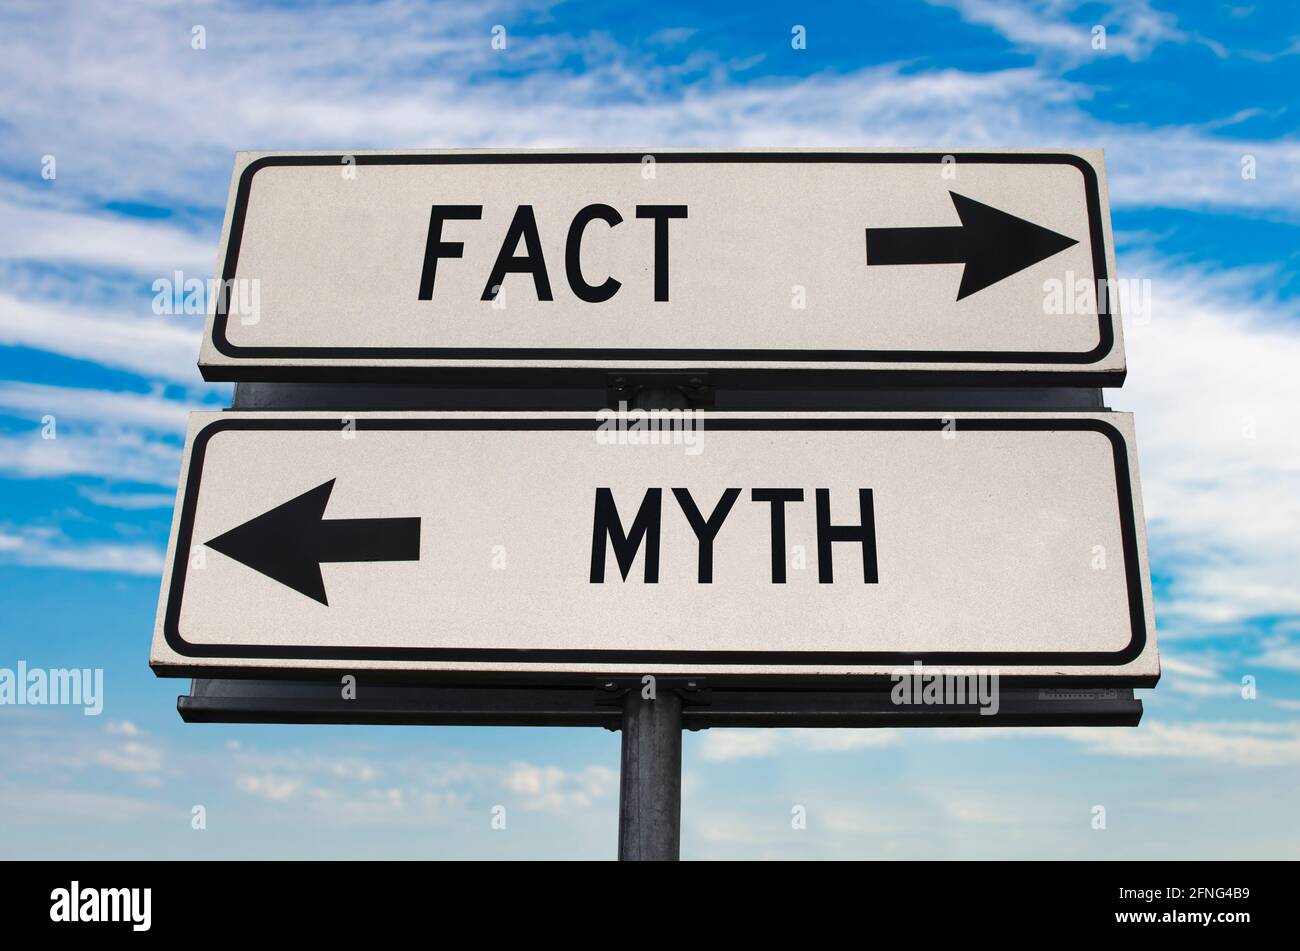 Fact versus myth road sign with two arrows on blue sky background. White two street sign with arrows on metal pole. Two way road sign with text. Stock Photo